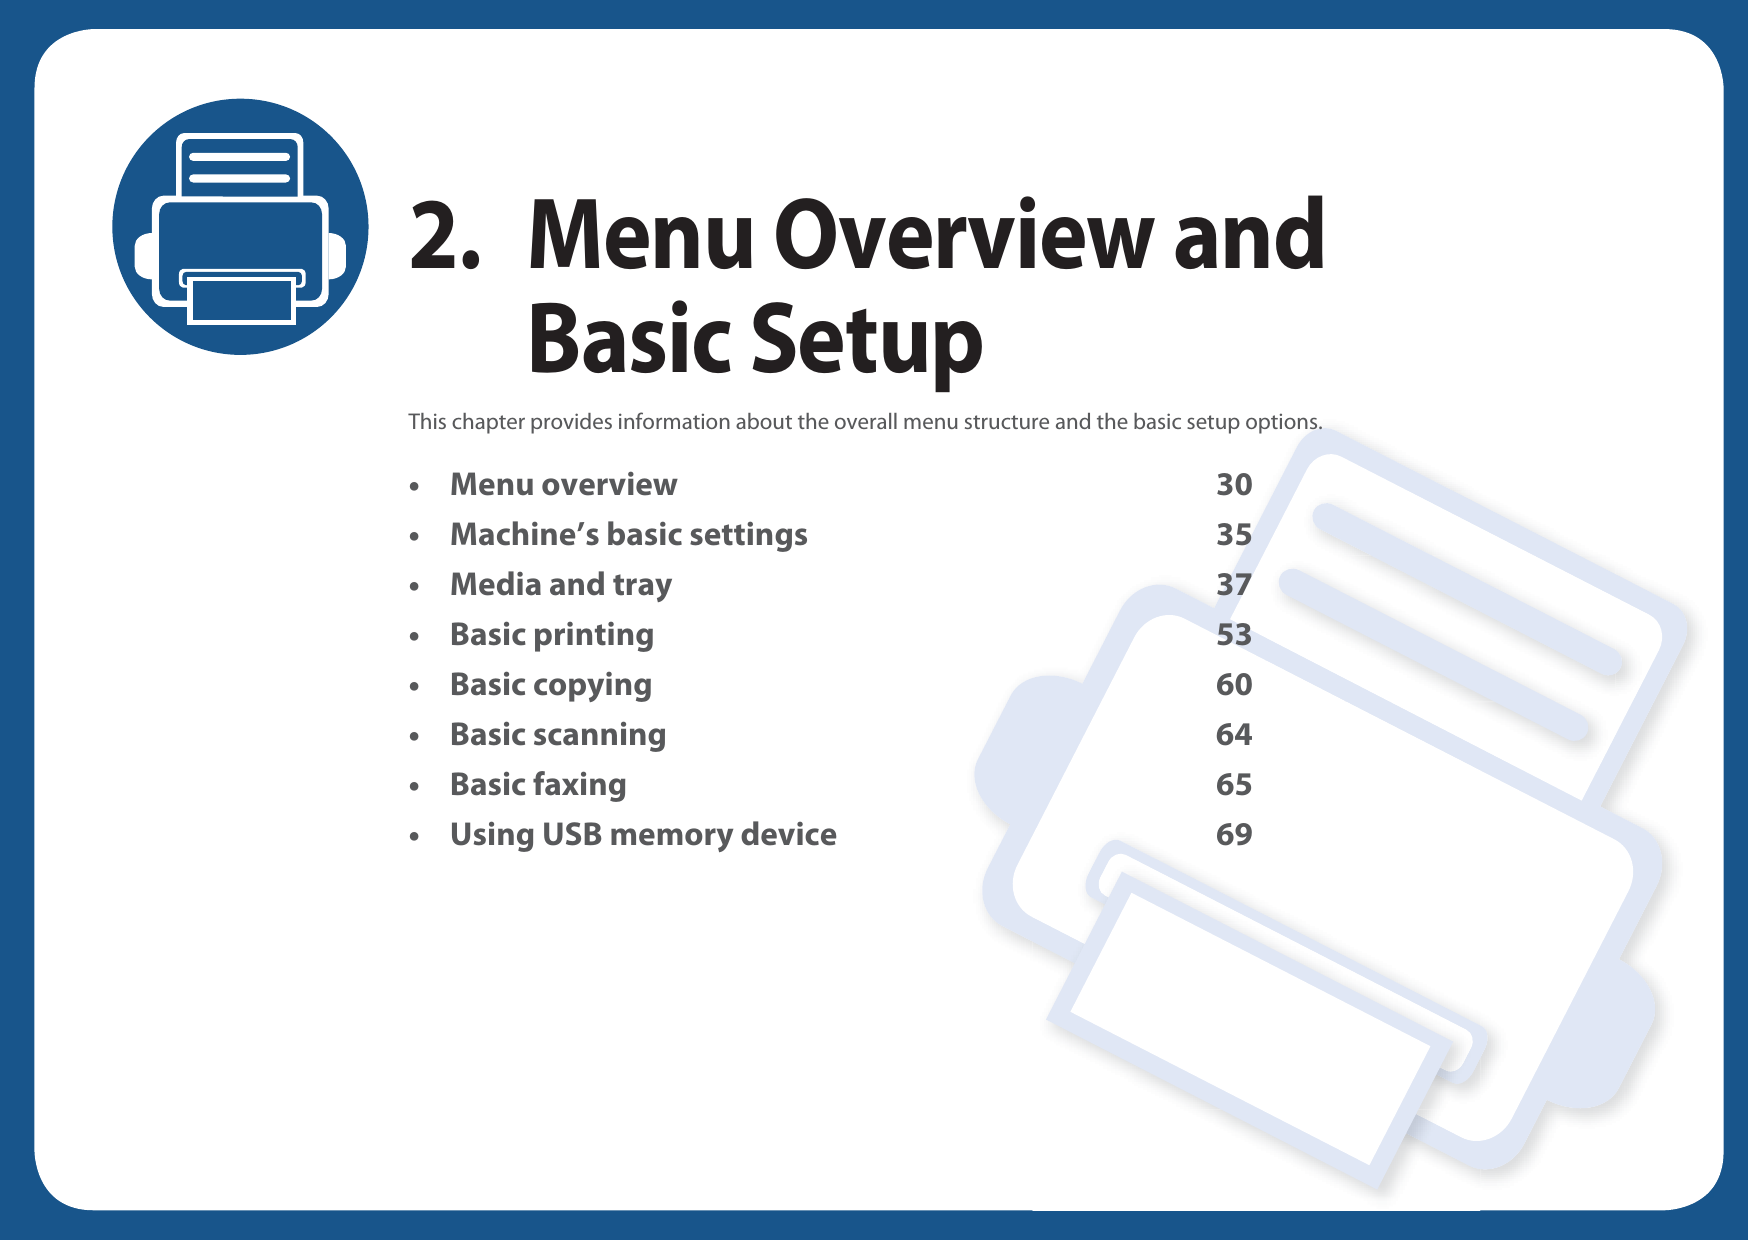 2. Menu Overview and Basic SetupThis chapter provides information about the overall menu structure and the basic setup options.• Menu overview 30• Machine’s basic settings 35• Media and tray 37• Basic printing 53• Basic copying 60• Basic scanning 64• Basic faxing 65• Using USB memory device 69